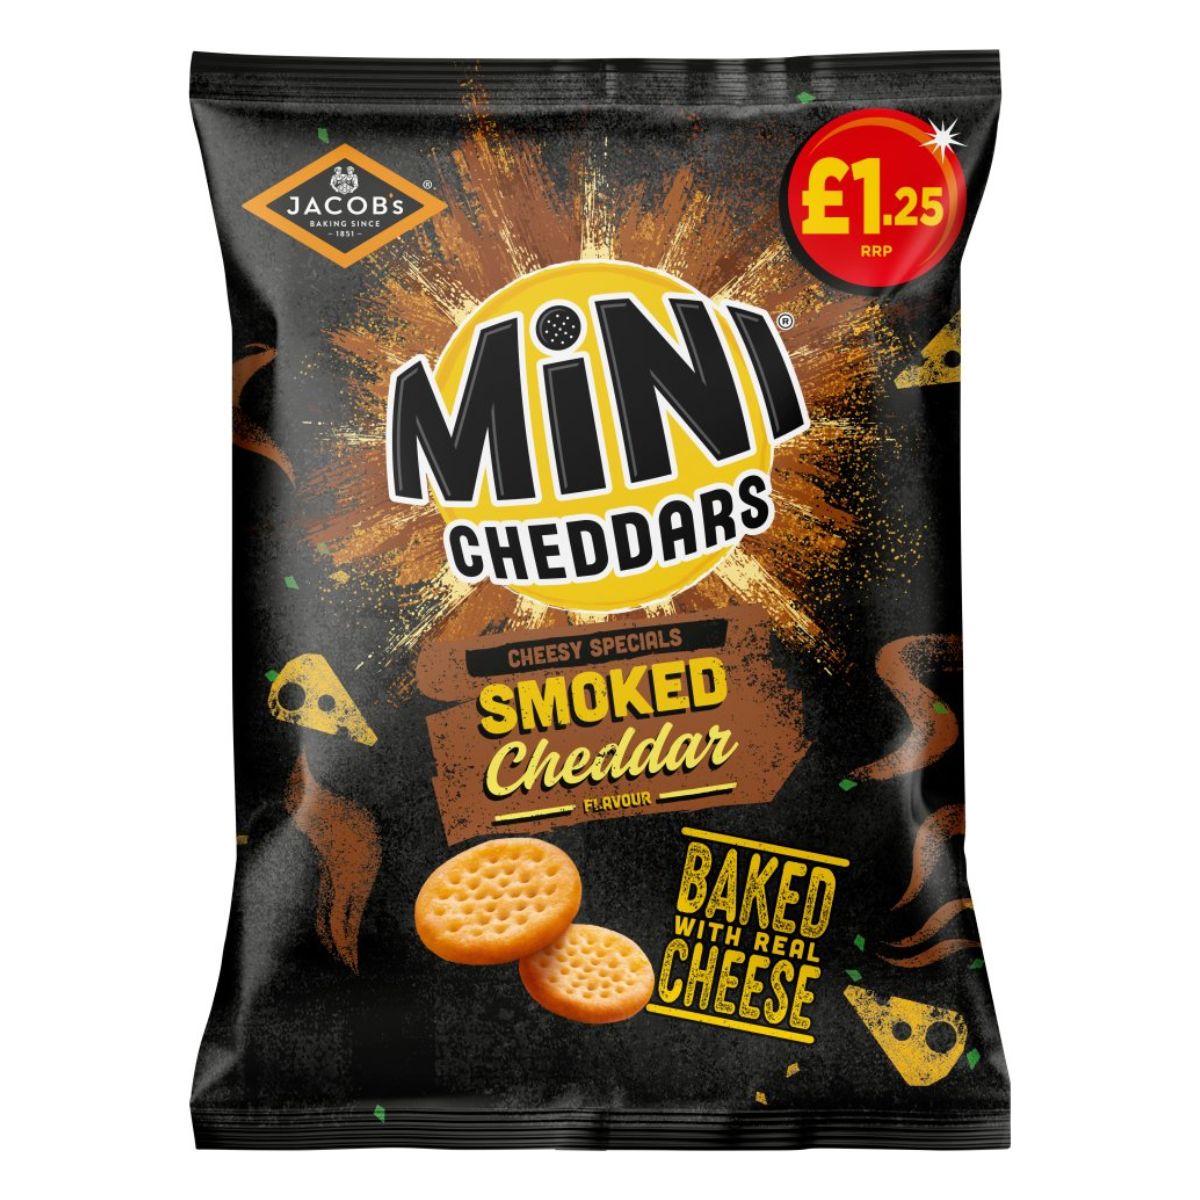 Package of Jacobs - Mini Cheddars Smoked Cheddar Baked Snacks in smoked cheddar flavor, with an advertised price of £1.25, displayed prominently on a black background with cheese graphics.